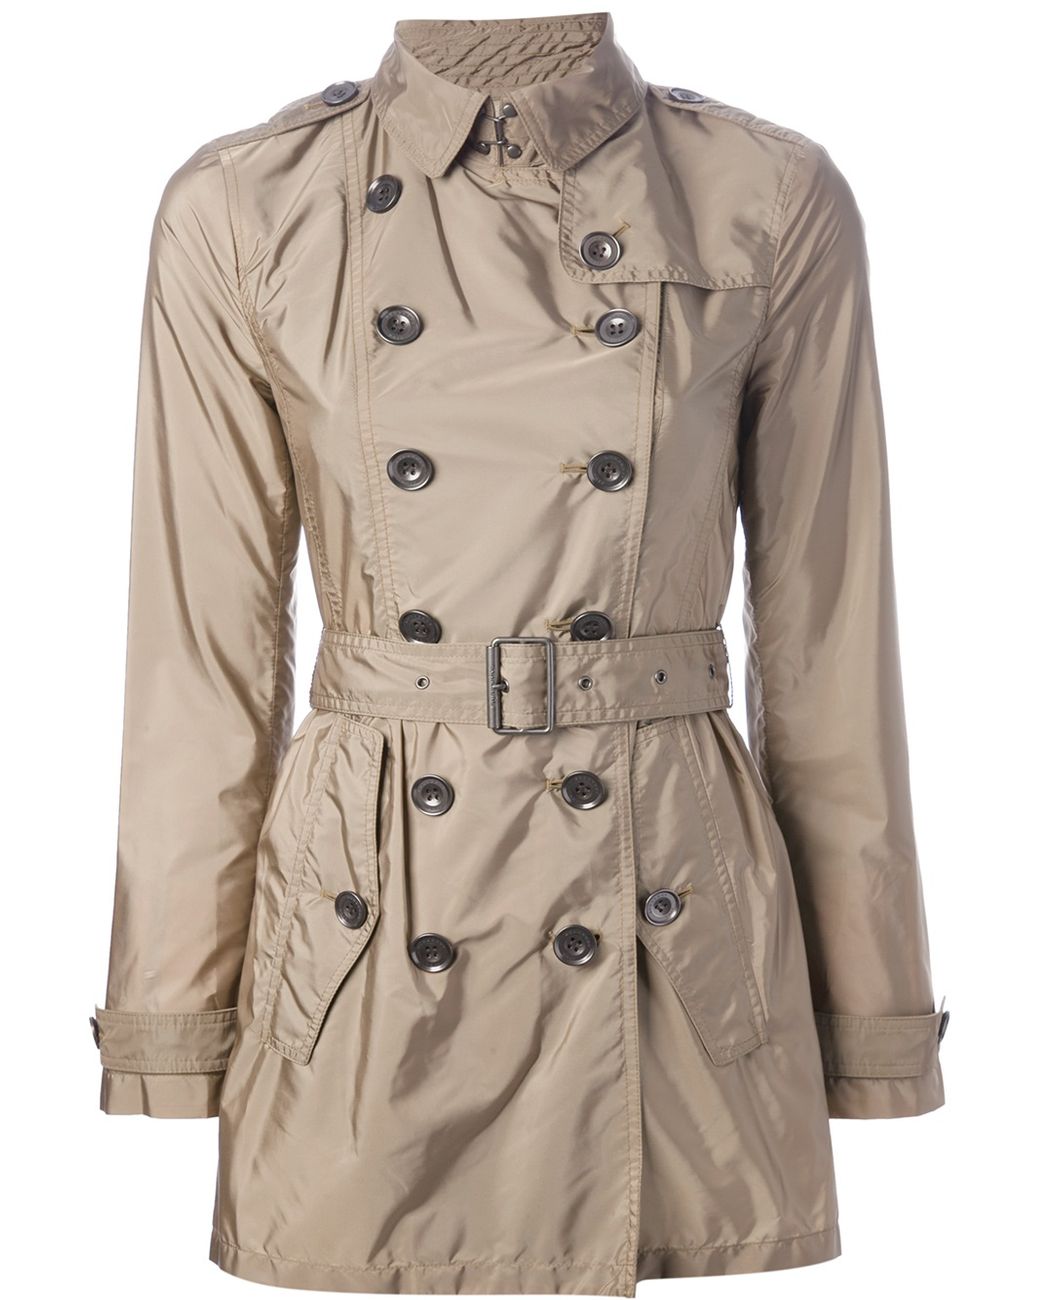 Burberry Brit Lightweight Trench Coat in Natural | Lyst